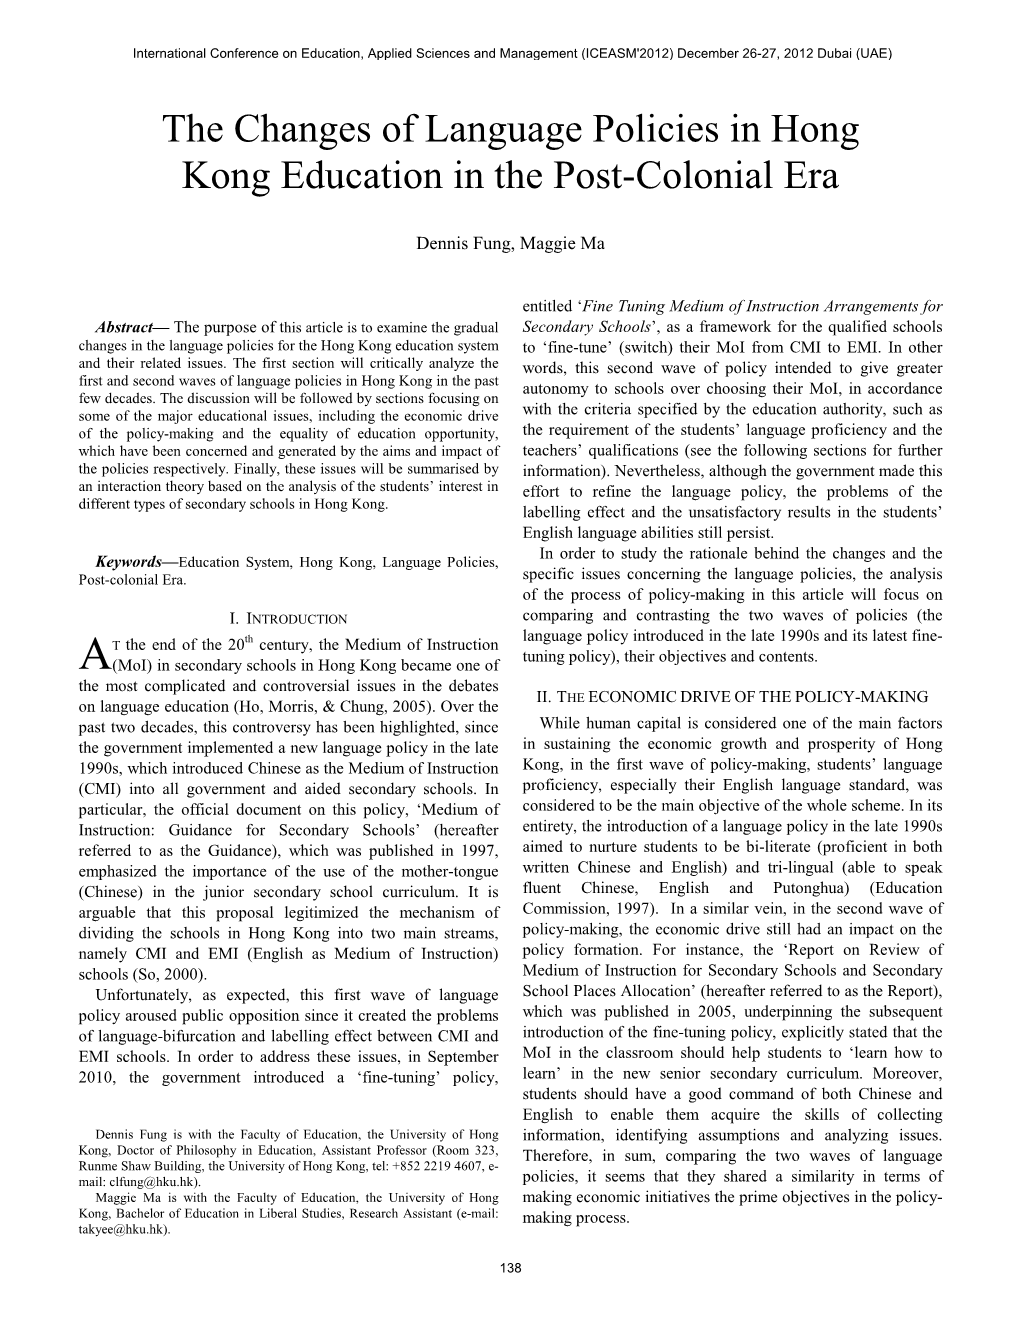 The Changes of Language Policies in Hong Kong Education in the Post-Colonial Era